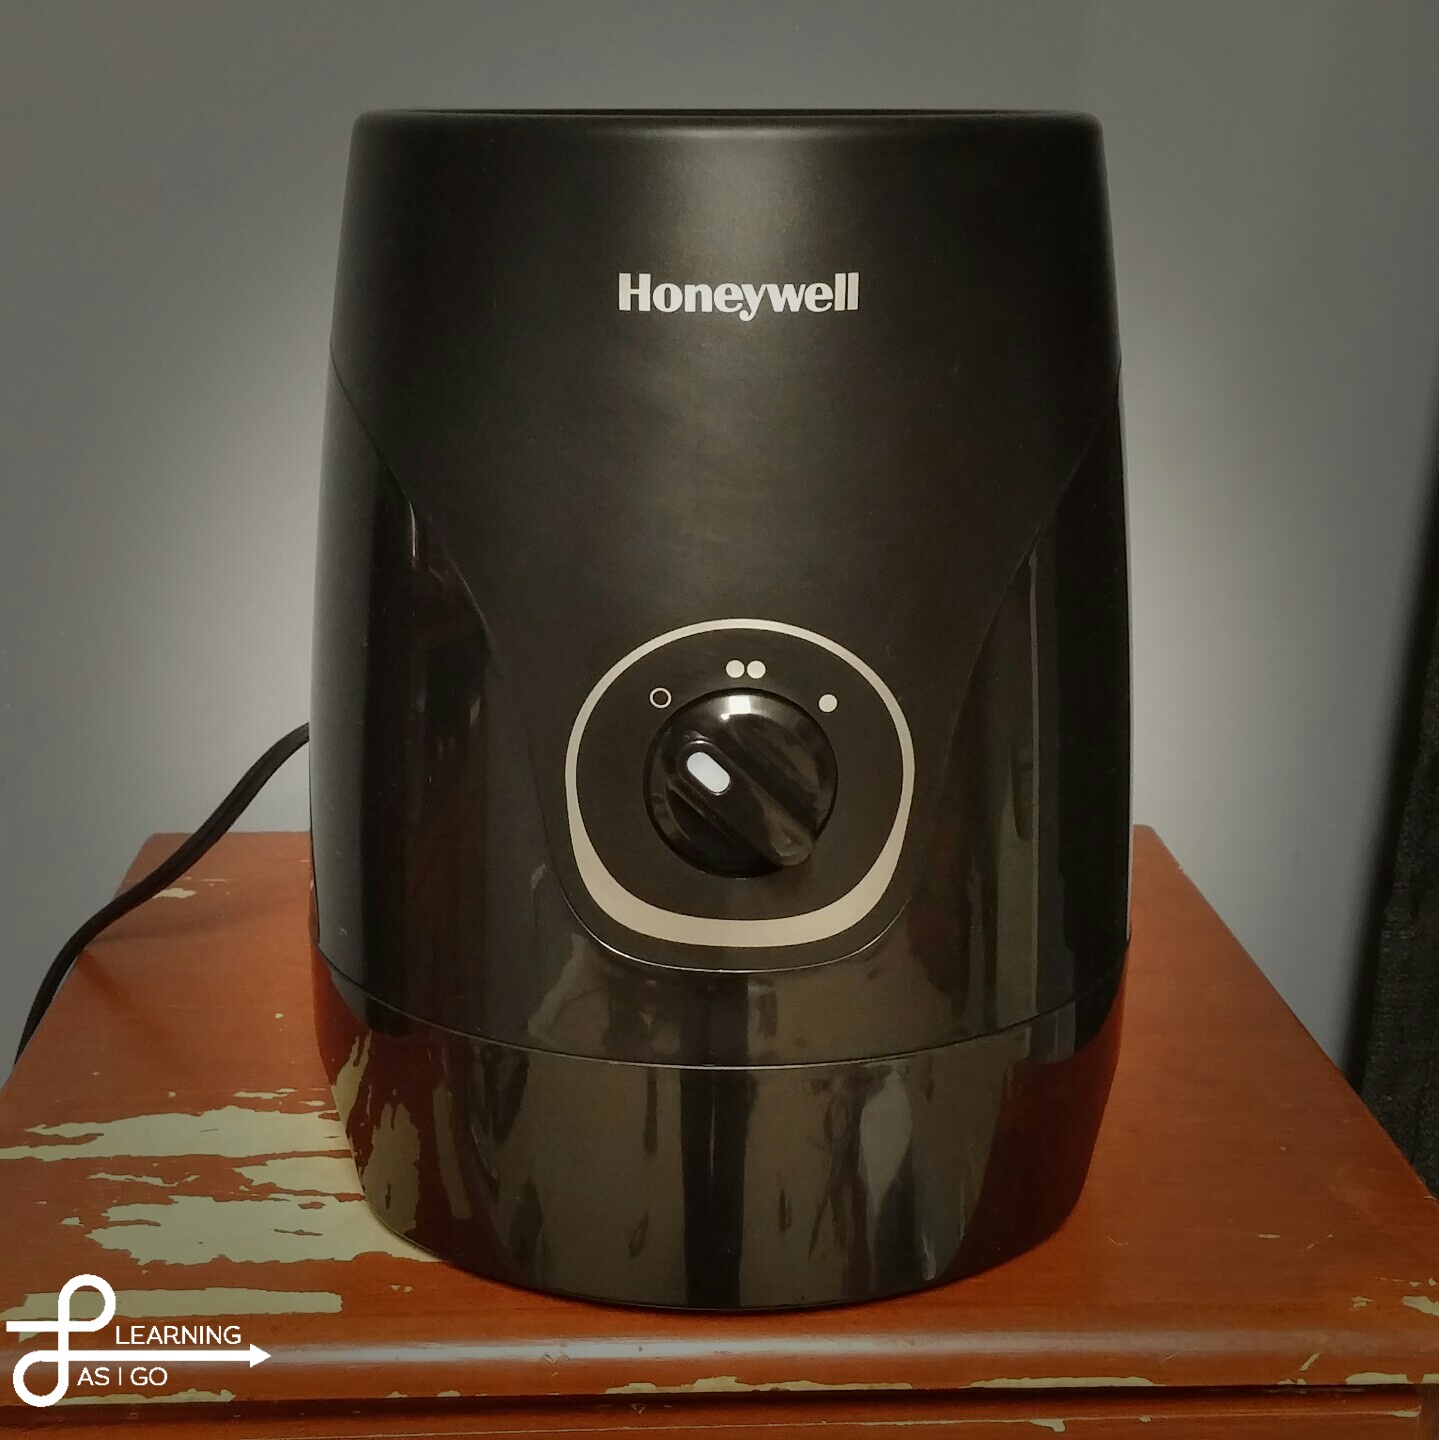 Honeywell Cool Moisture Humidifier, A Review